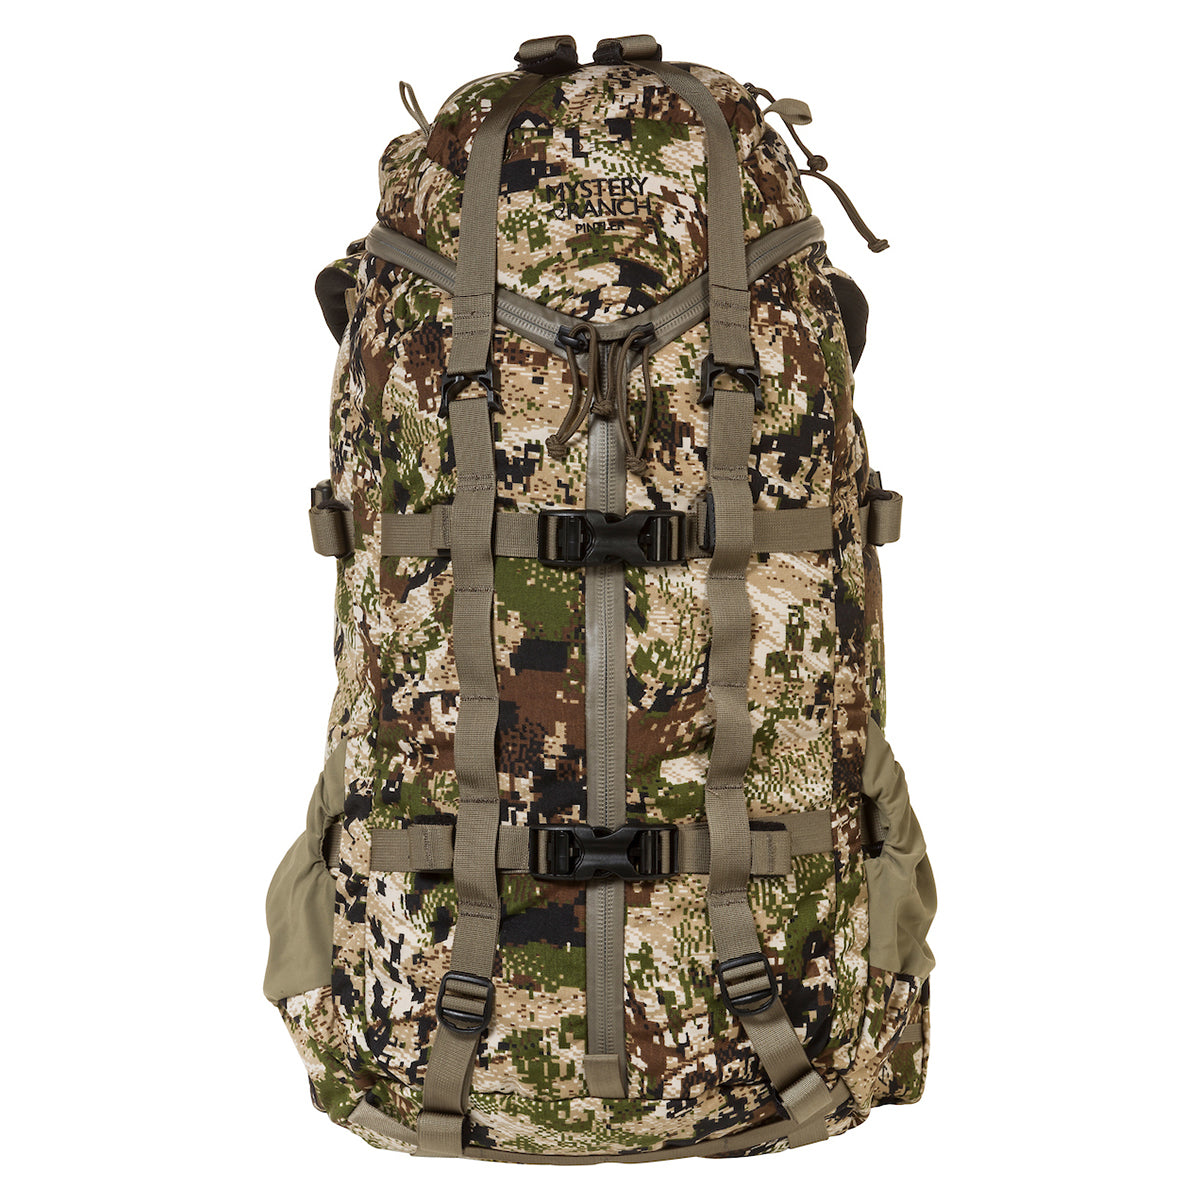 Mystery Ranch Pintler Backpack in Mystery Ranch Pintler Backpack (2020) by Mystery Ranch | Gear - goHUNT Shop by GOHUNT | Mystery Ranch - GOHUNT Shop